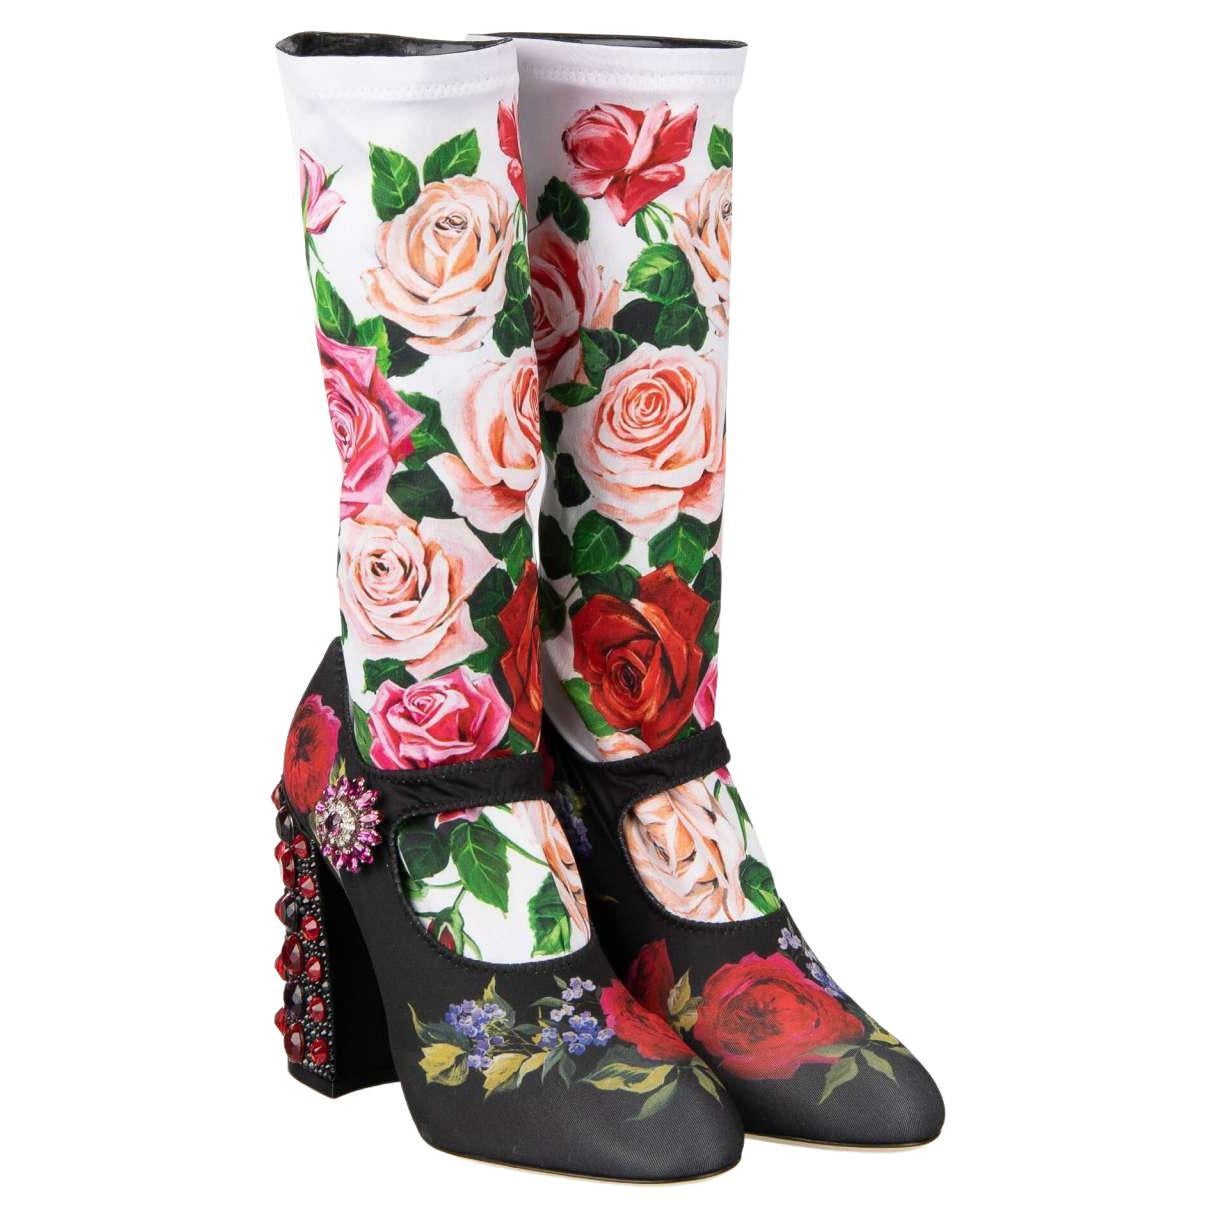 D&G Roses Printed Elastic Socks Pumps VALLY with Crystals Heel Black White 40 For Sale